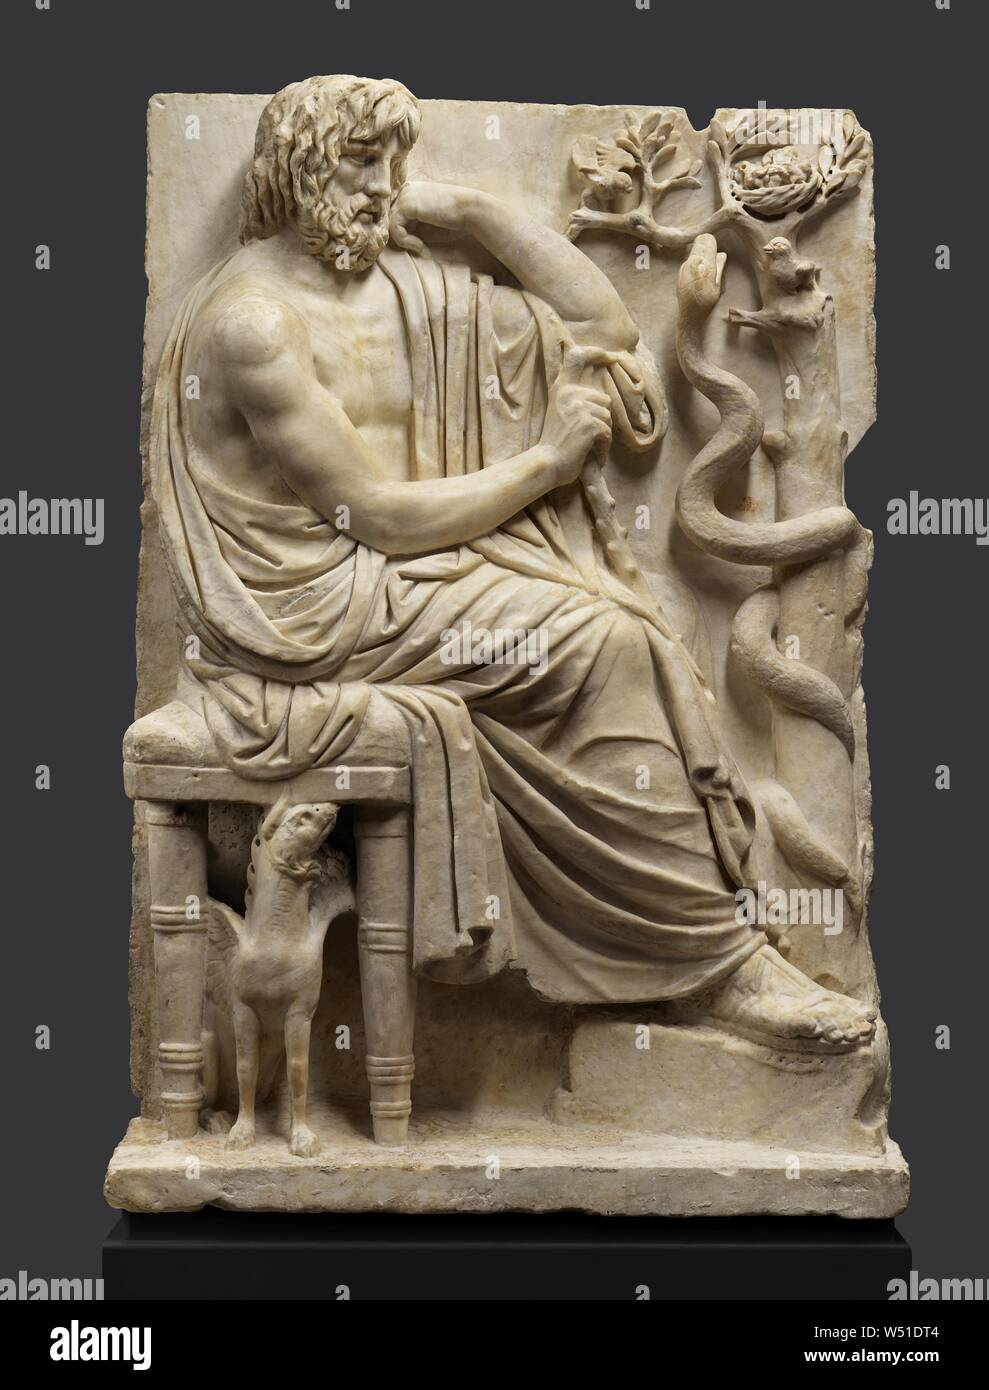 Relief with the Seer Calchas, Unknown, Relief: 140 - 160, Head: 170 - 190, Marble, 145 × 99.5 × 26.6 cm, 408 kg (57 1/16 × 39 3/16 × 10 1/2 in., 899.4768 lb Stock Photo